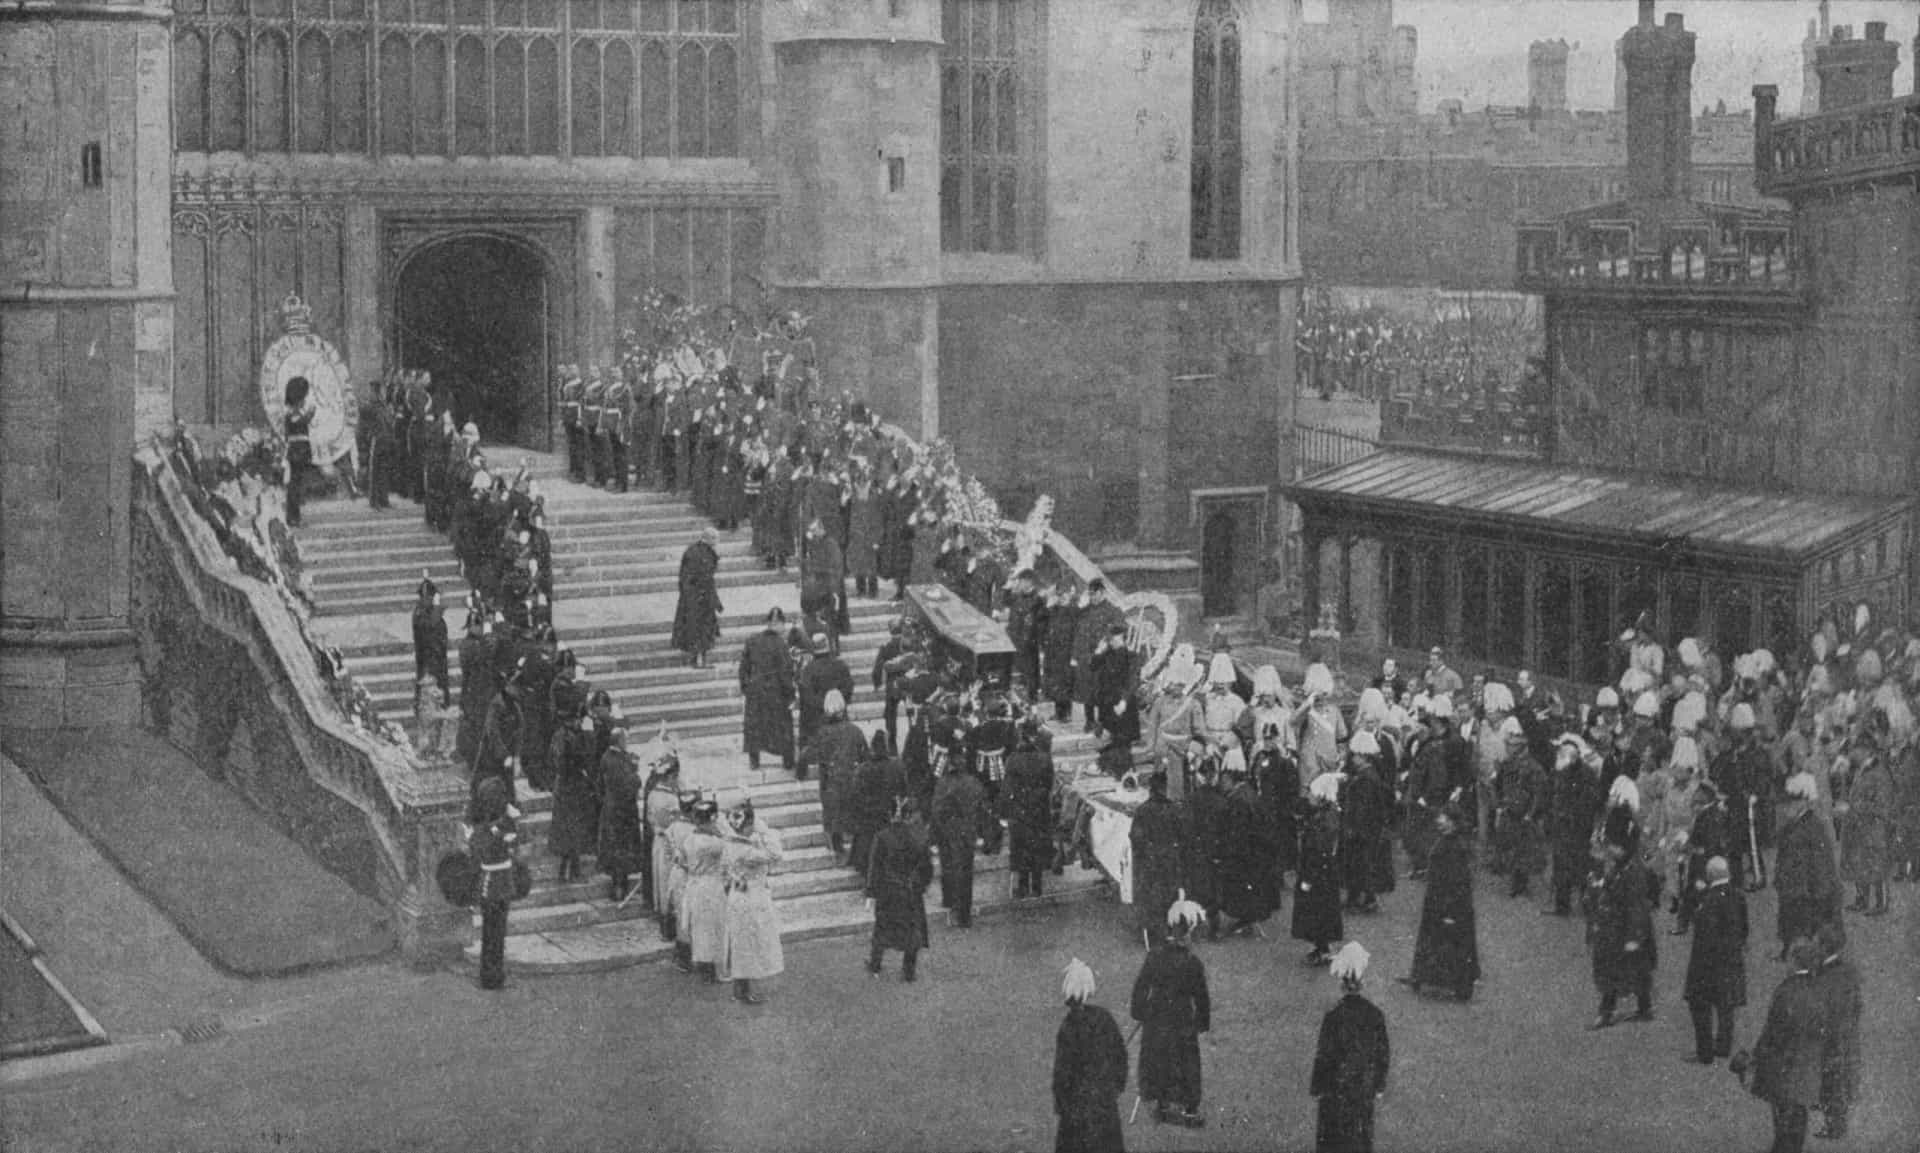 <p>When it came to her funeral, Queen Victoria wanted a ceremony fit for a monarch of her stature. She had ruled for 61 years, a record-setting reign until it was broken by Queen Elizabeth II in 2015.</p>